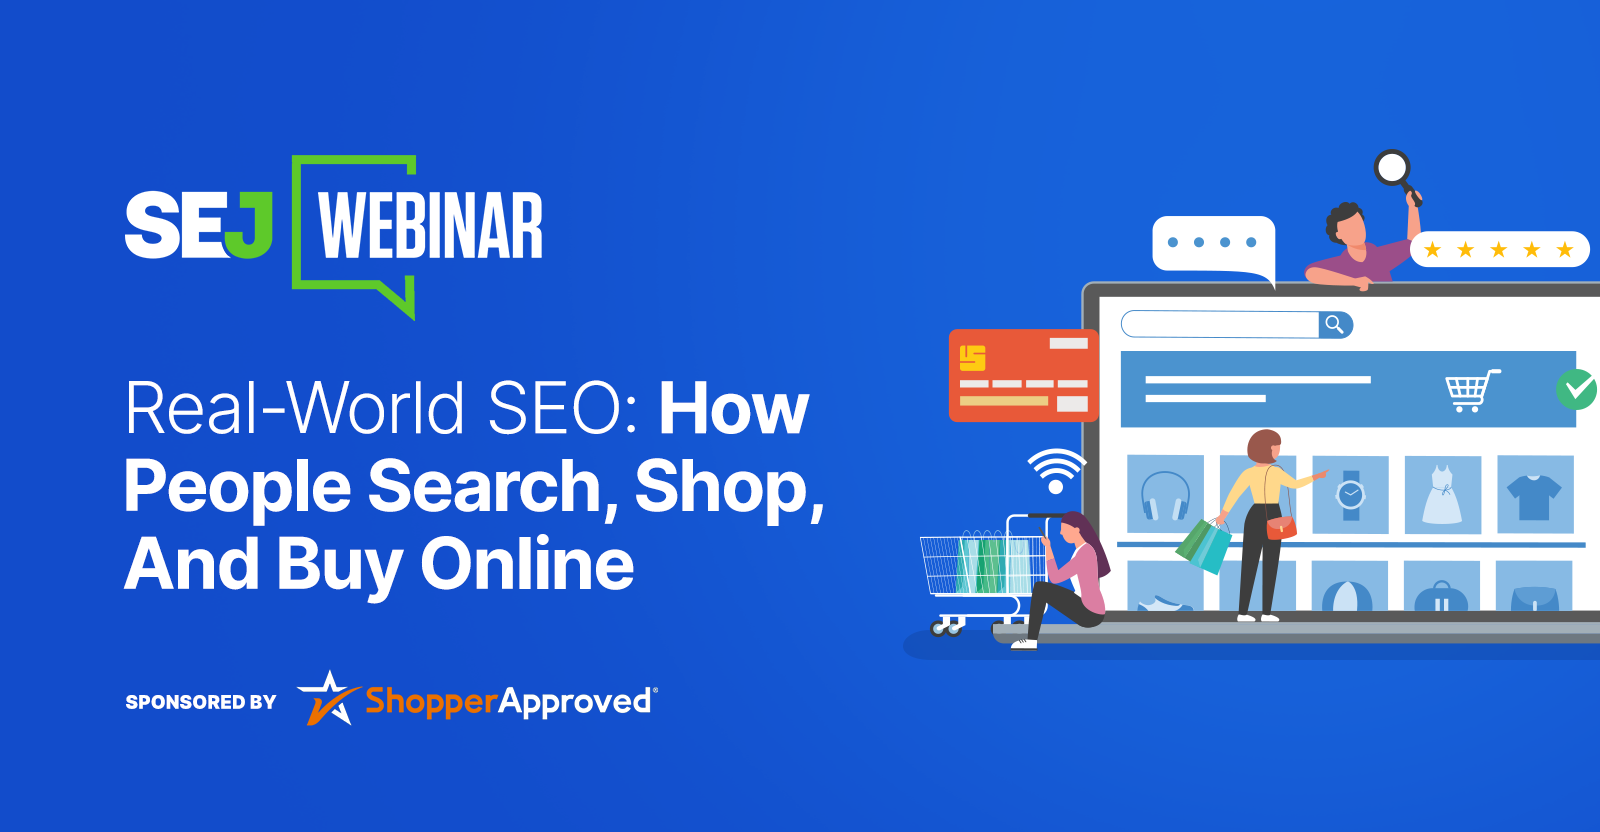 Real-World SEO: How People Search, Shop & Buy Online via @sejournal, @hethr_campbell